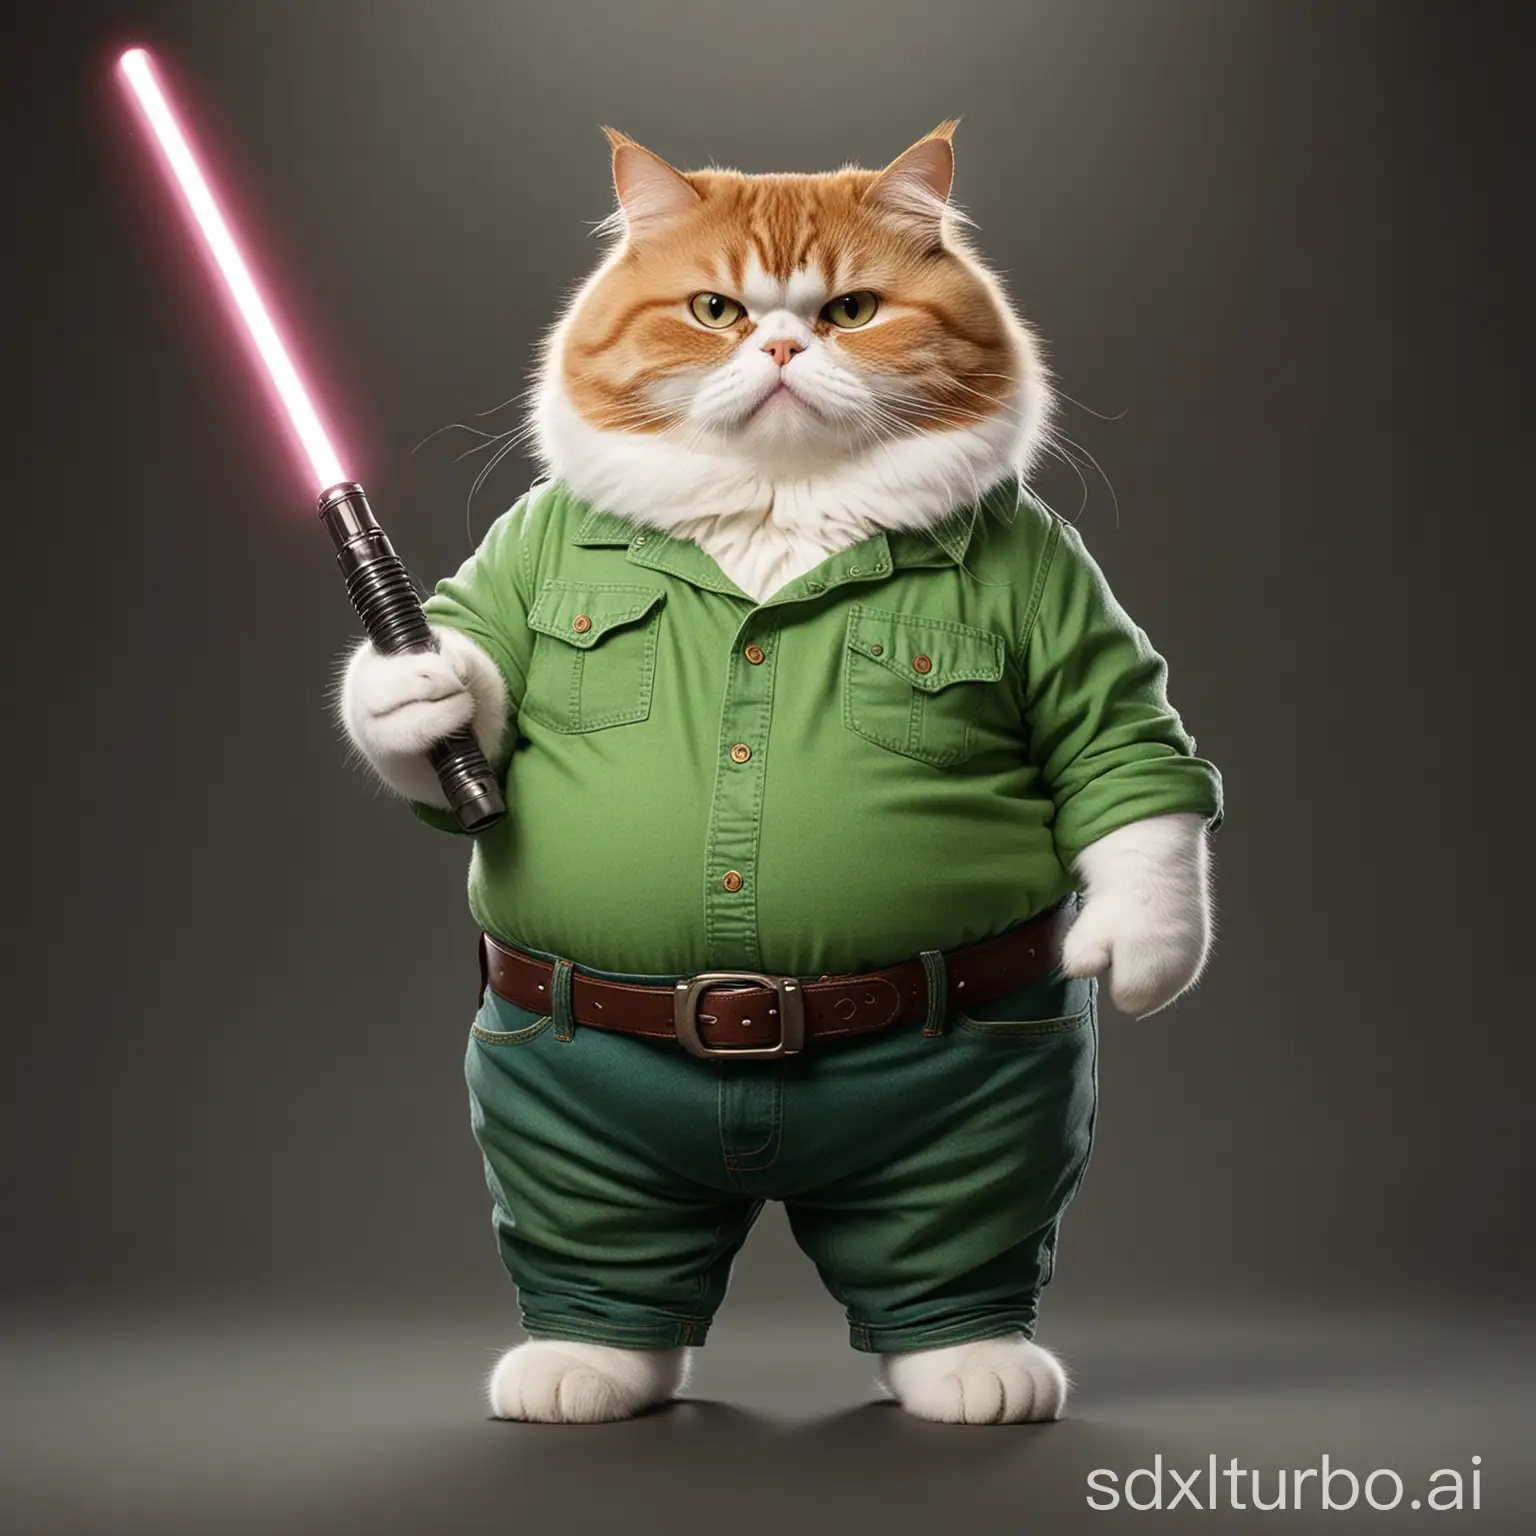 fat cat in Green jeans Holding a Light saber